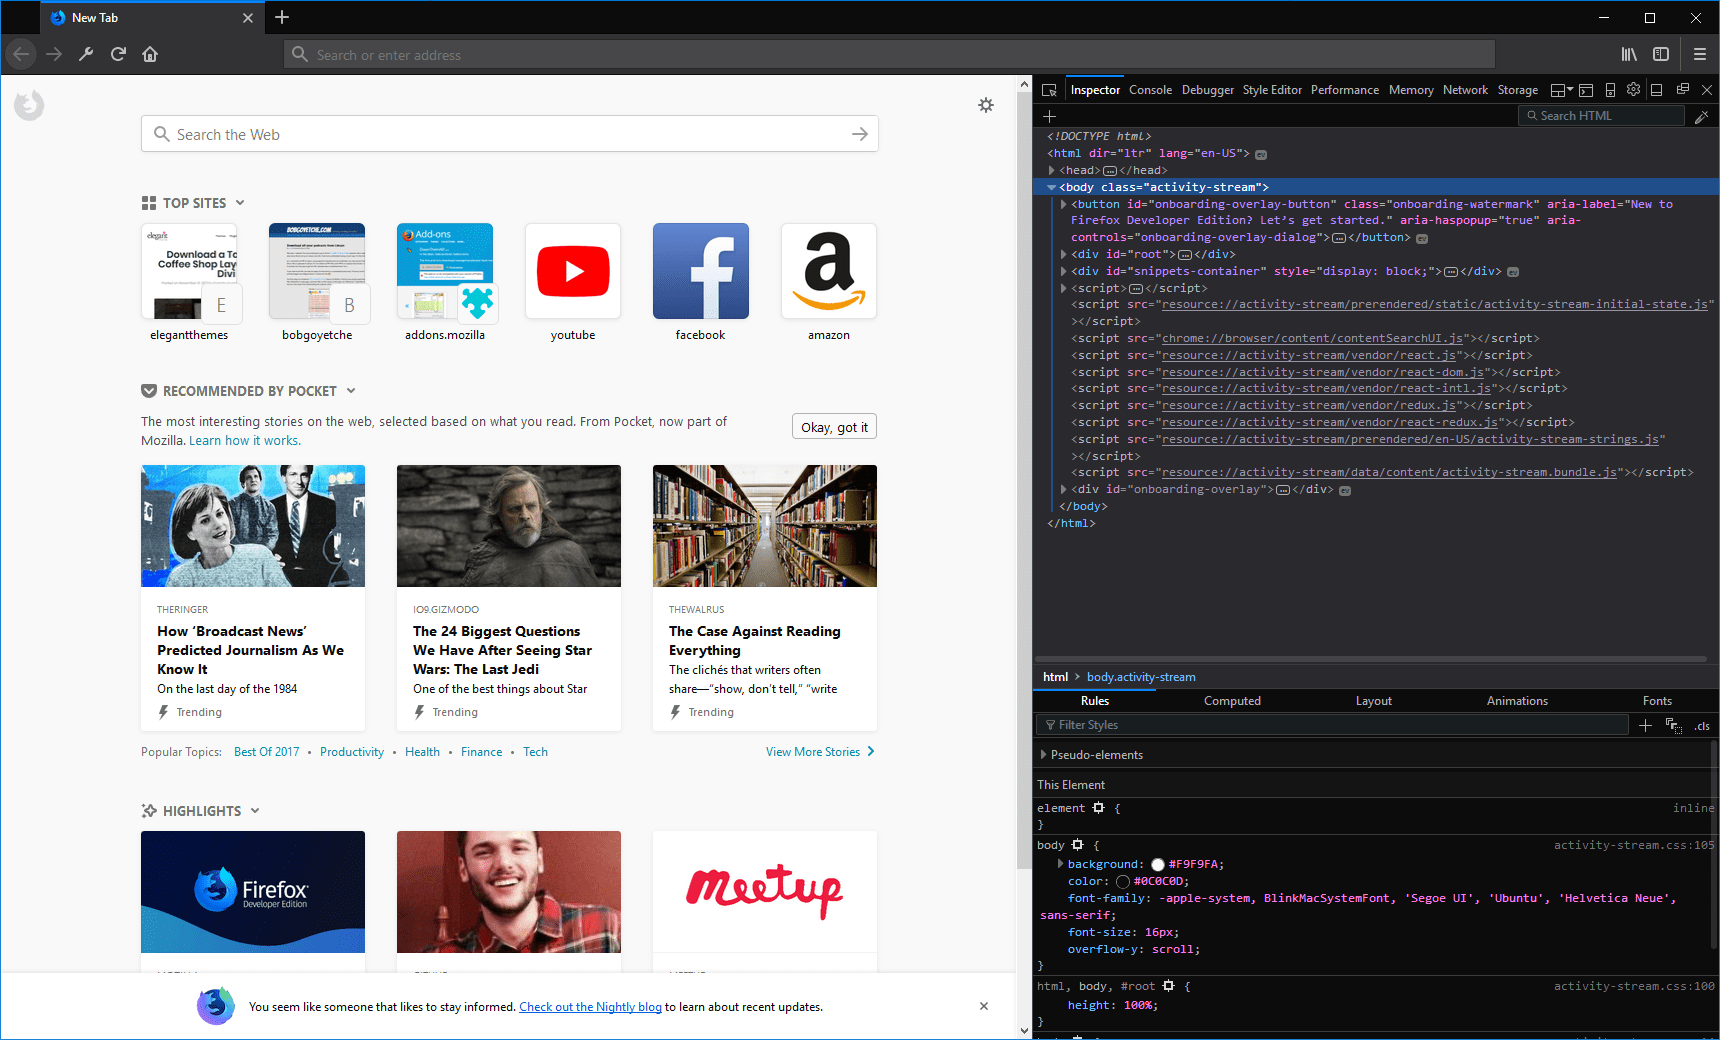 For those of you asking about using the Avatar Sandbox on Firefox